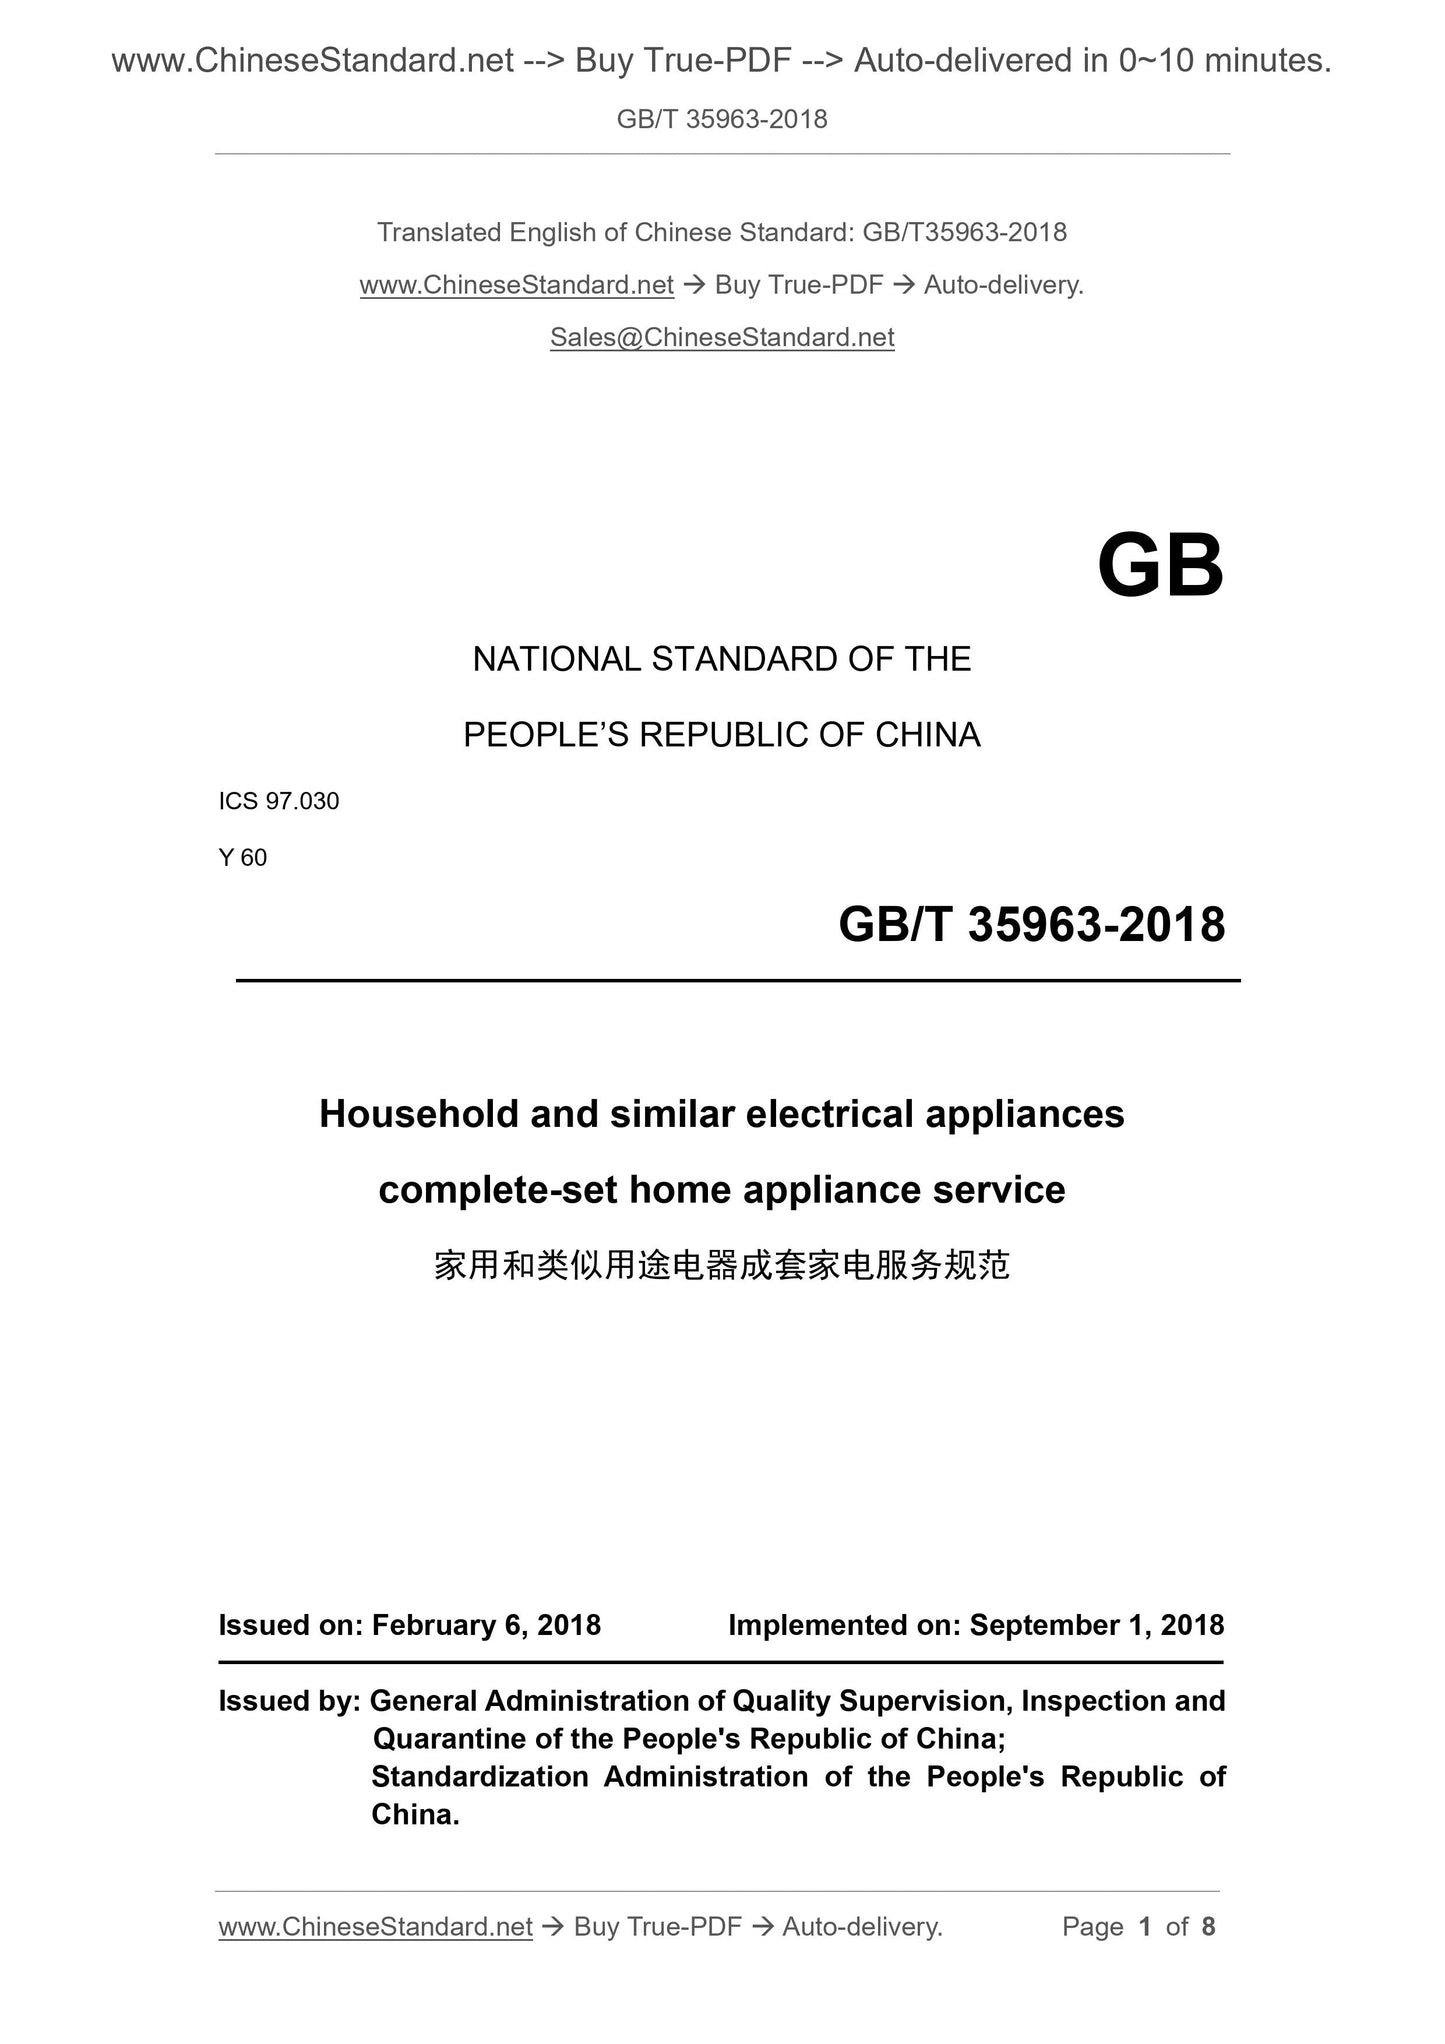 GB/T 35963-2018 Page 1